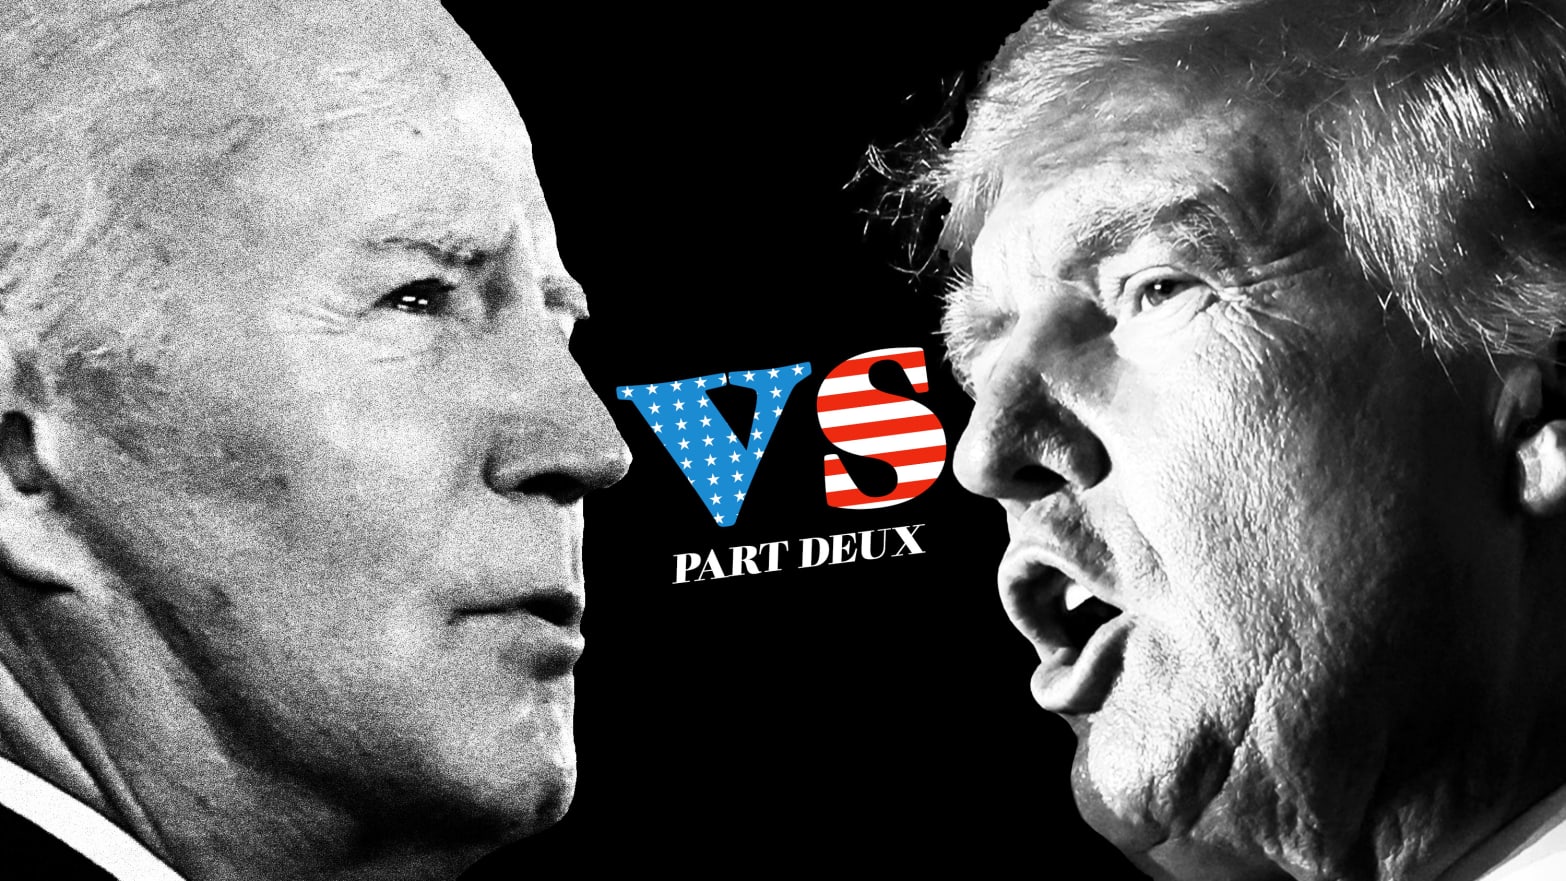 Biden v. Trump Rematch in 2024 Presidential Race Is Most Likely, Doug